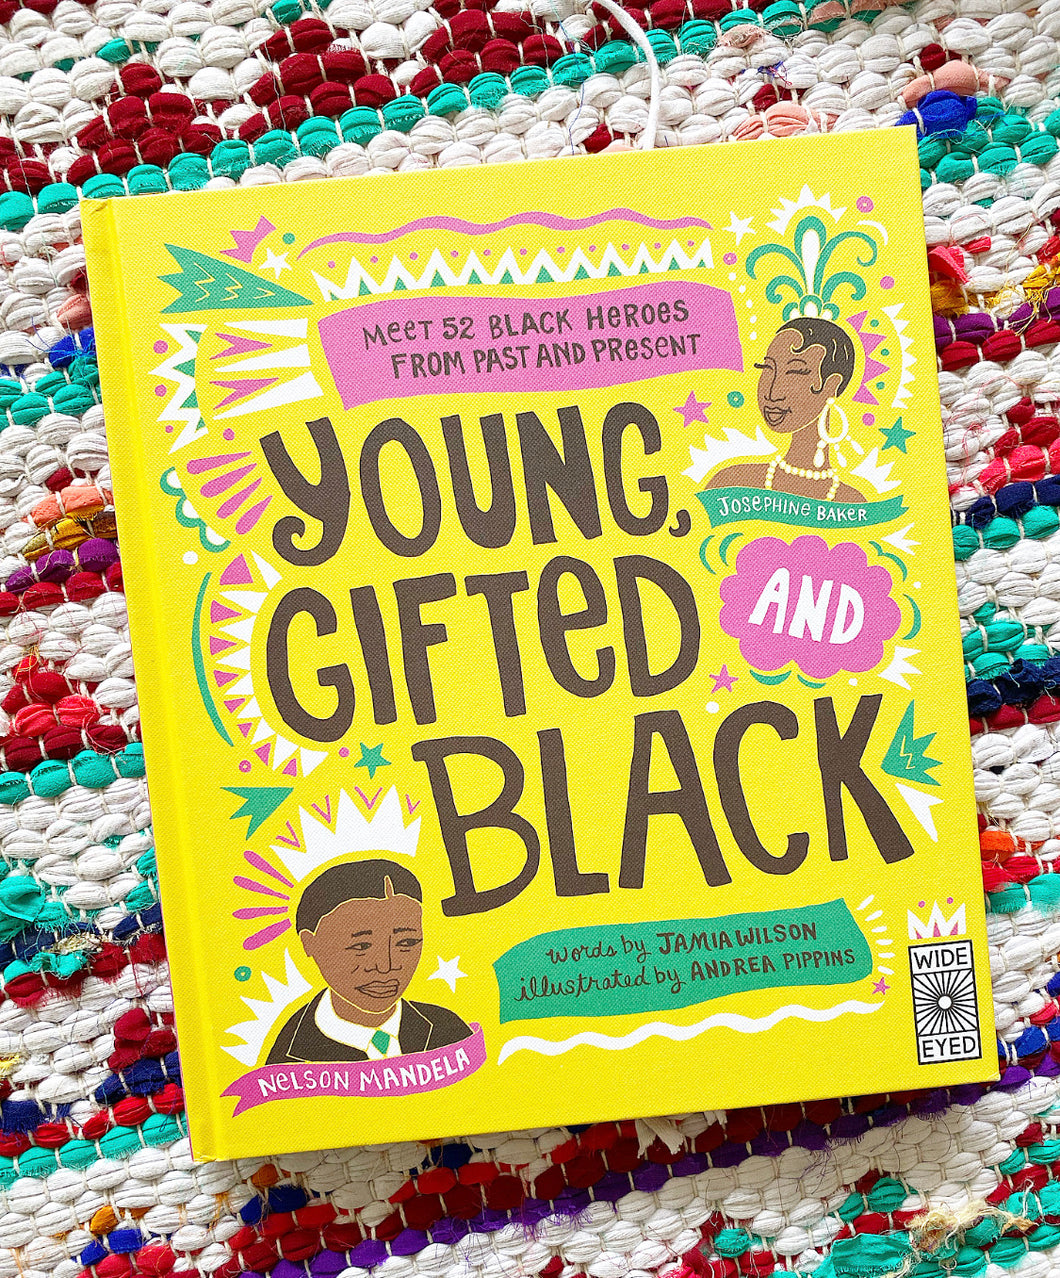 Young Gifted + Black, MEET 52 BLACK HEROES FROM PAST AND PRESENT |  Jamia Wilson, Pippins